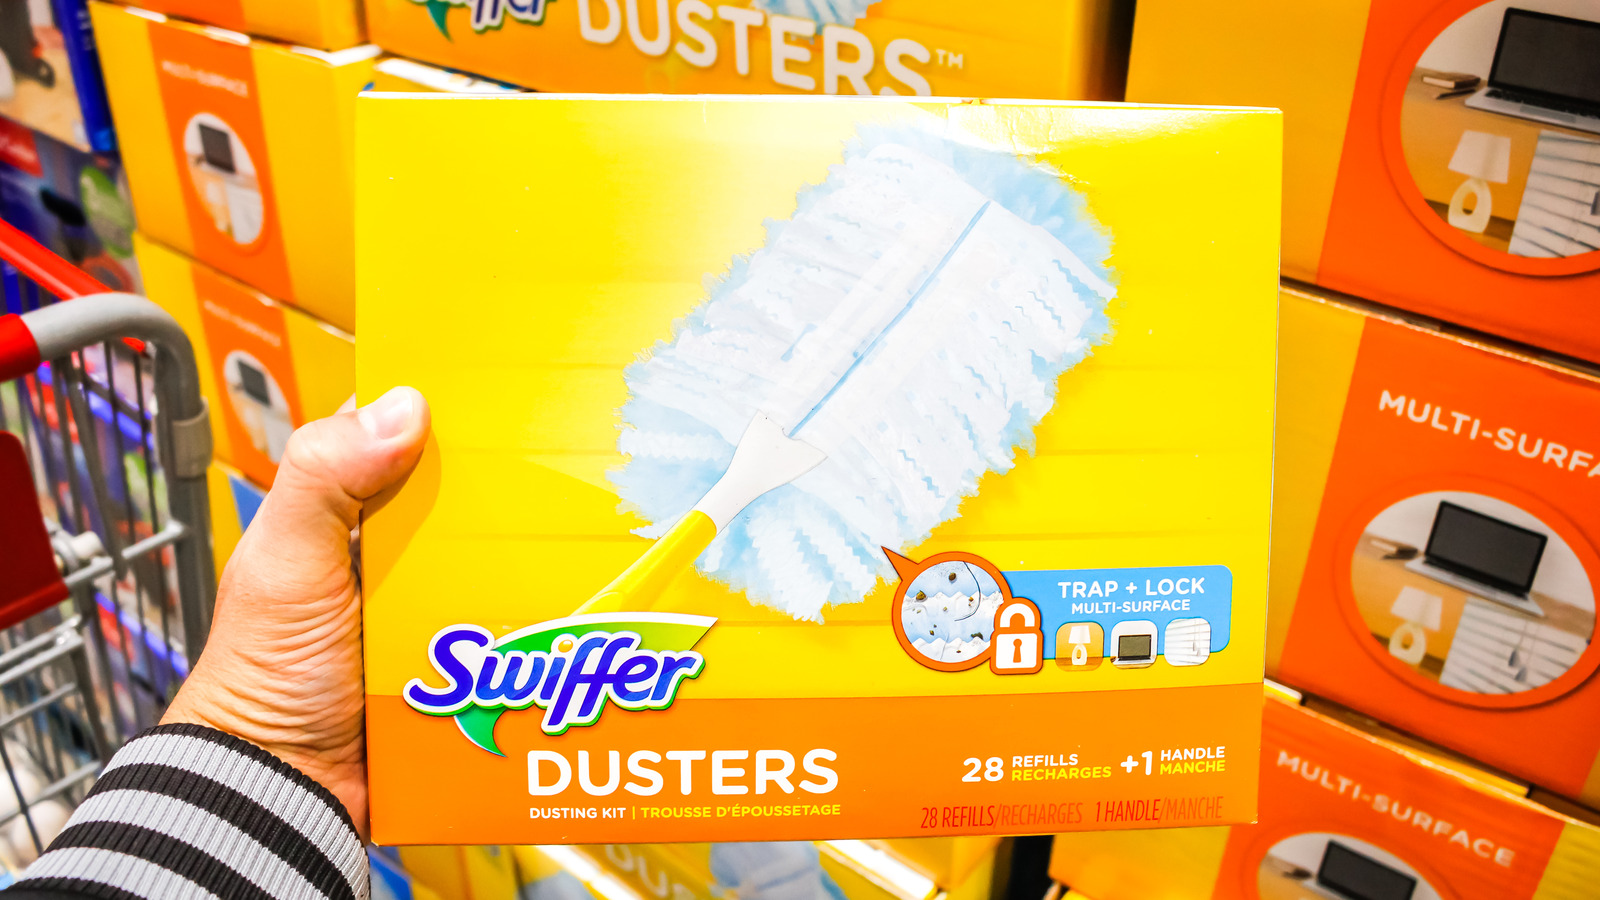 https://www.housedigest.com/img/gallery/11-unexpected-things-you-can-clean-with-a-swiffer/l-intro-1695051595.jpg